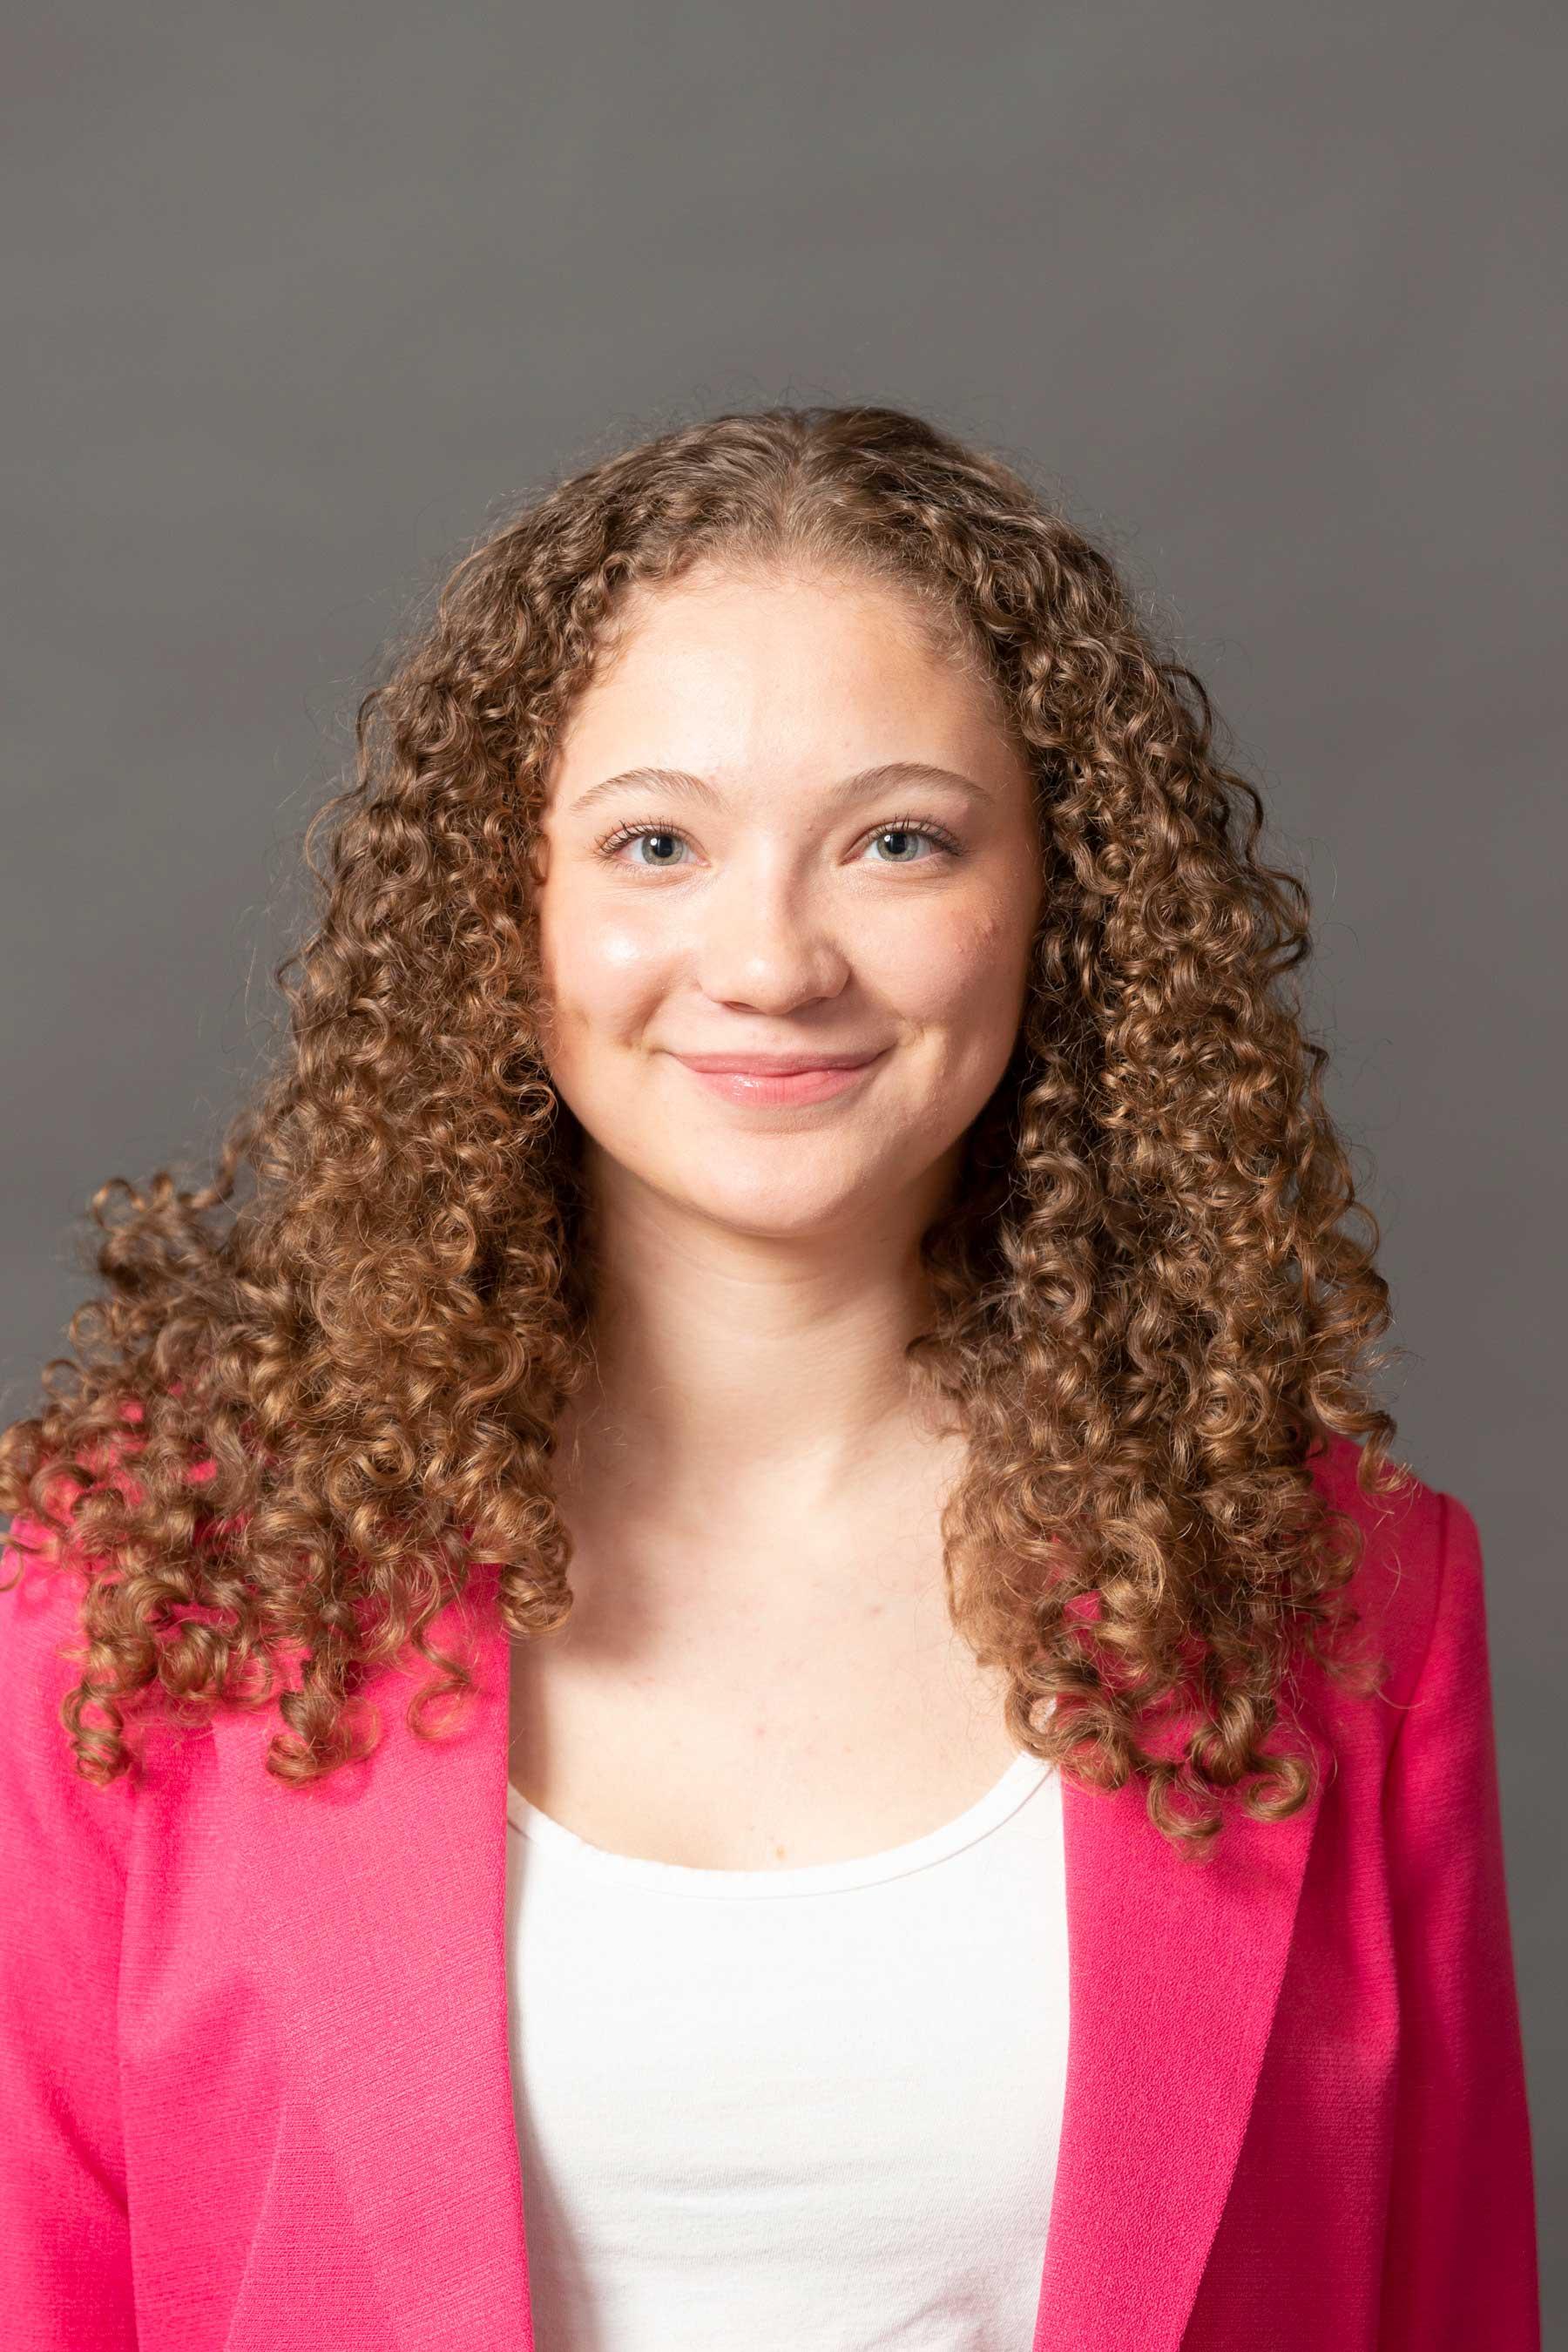 Beautiful curls abound on this professionally dressed, smiling student wearing fuschia.